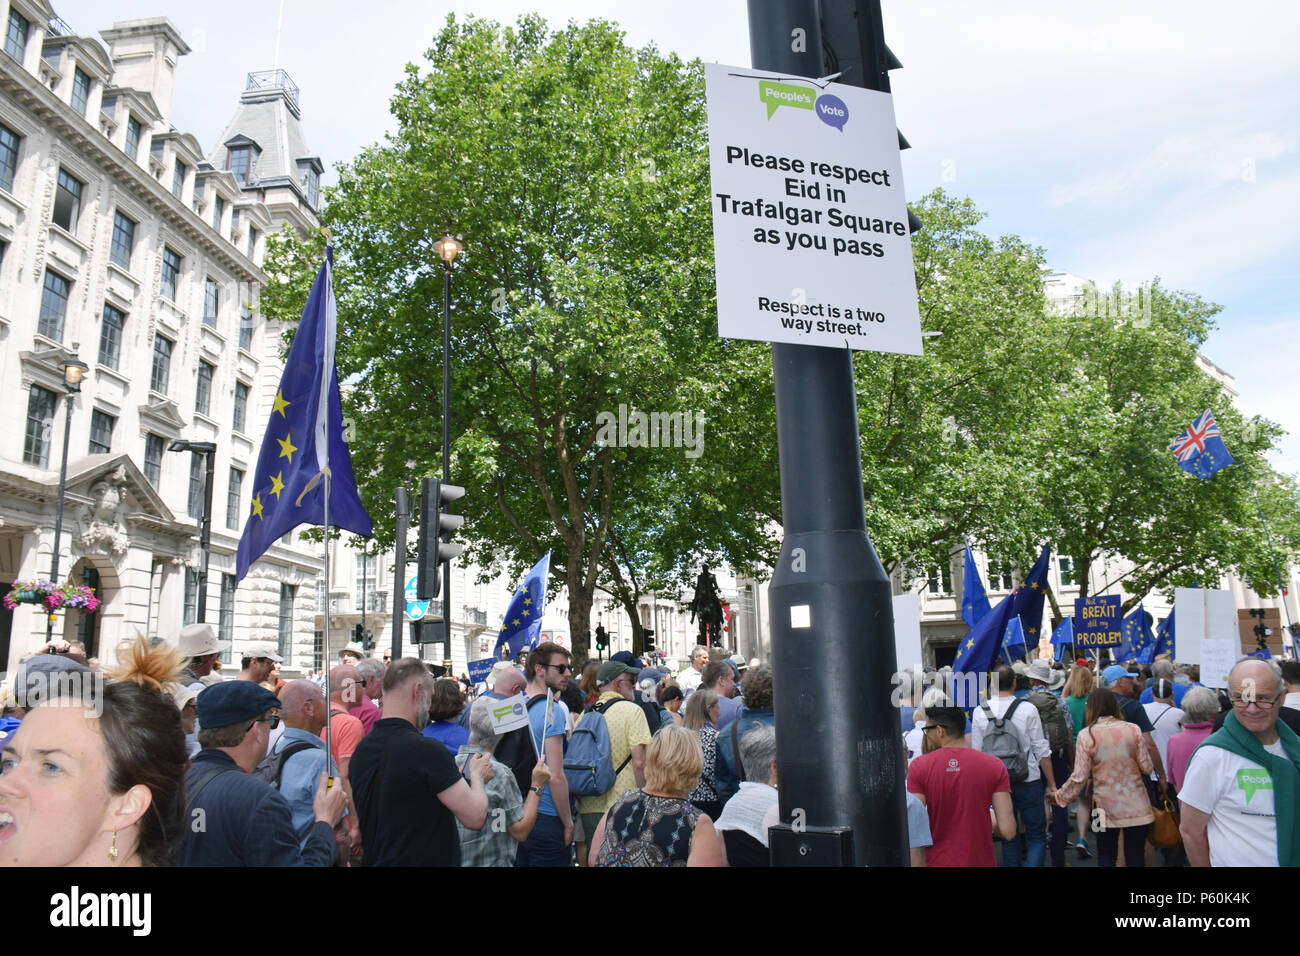 Anti Brexit demo, London 23 June 2018 UK. Campaign for a People's Vote on the final Brexit deal. March passing the Eid celebrations in Trafalgar Squar Stock Photo